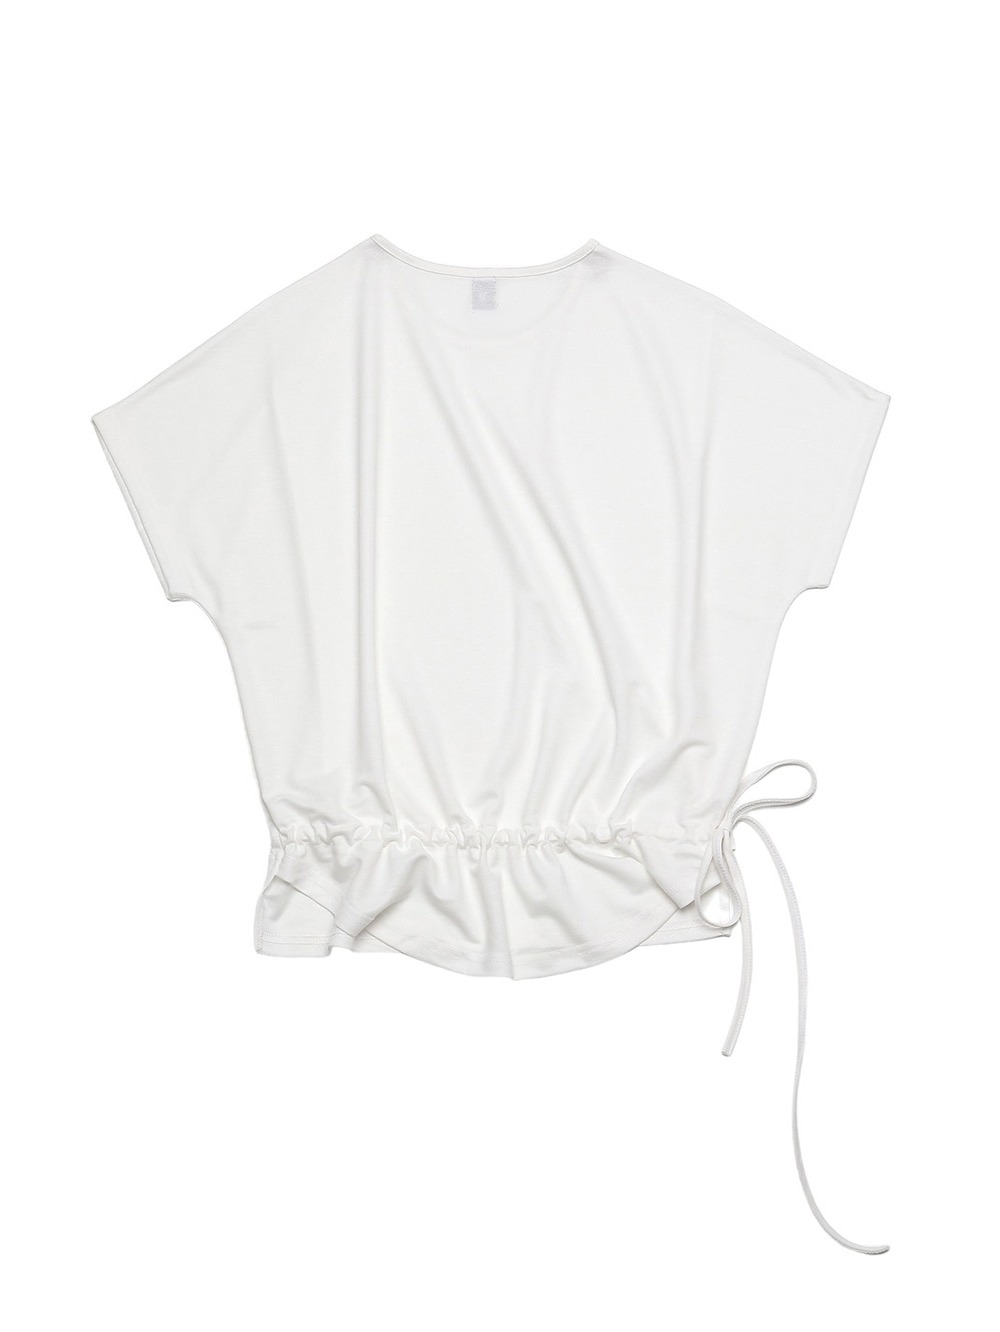 OLLY STRAP TOP (4color)